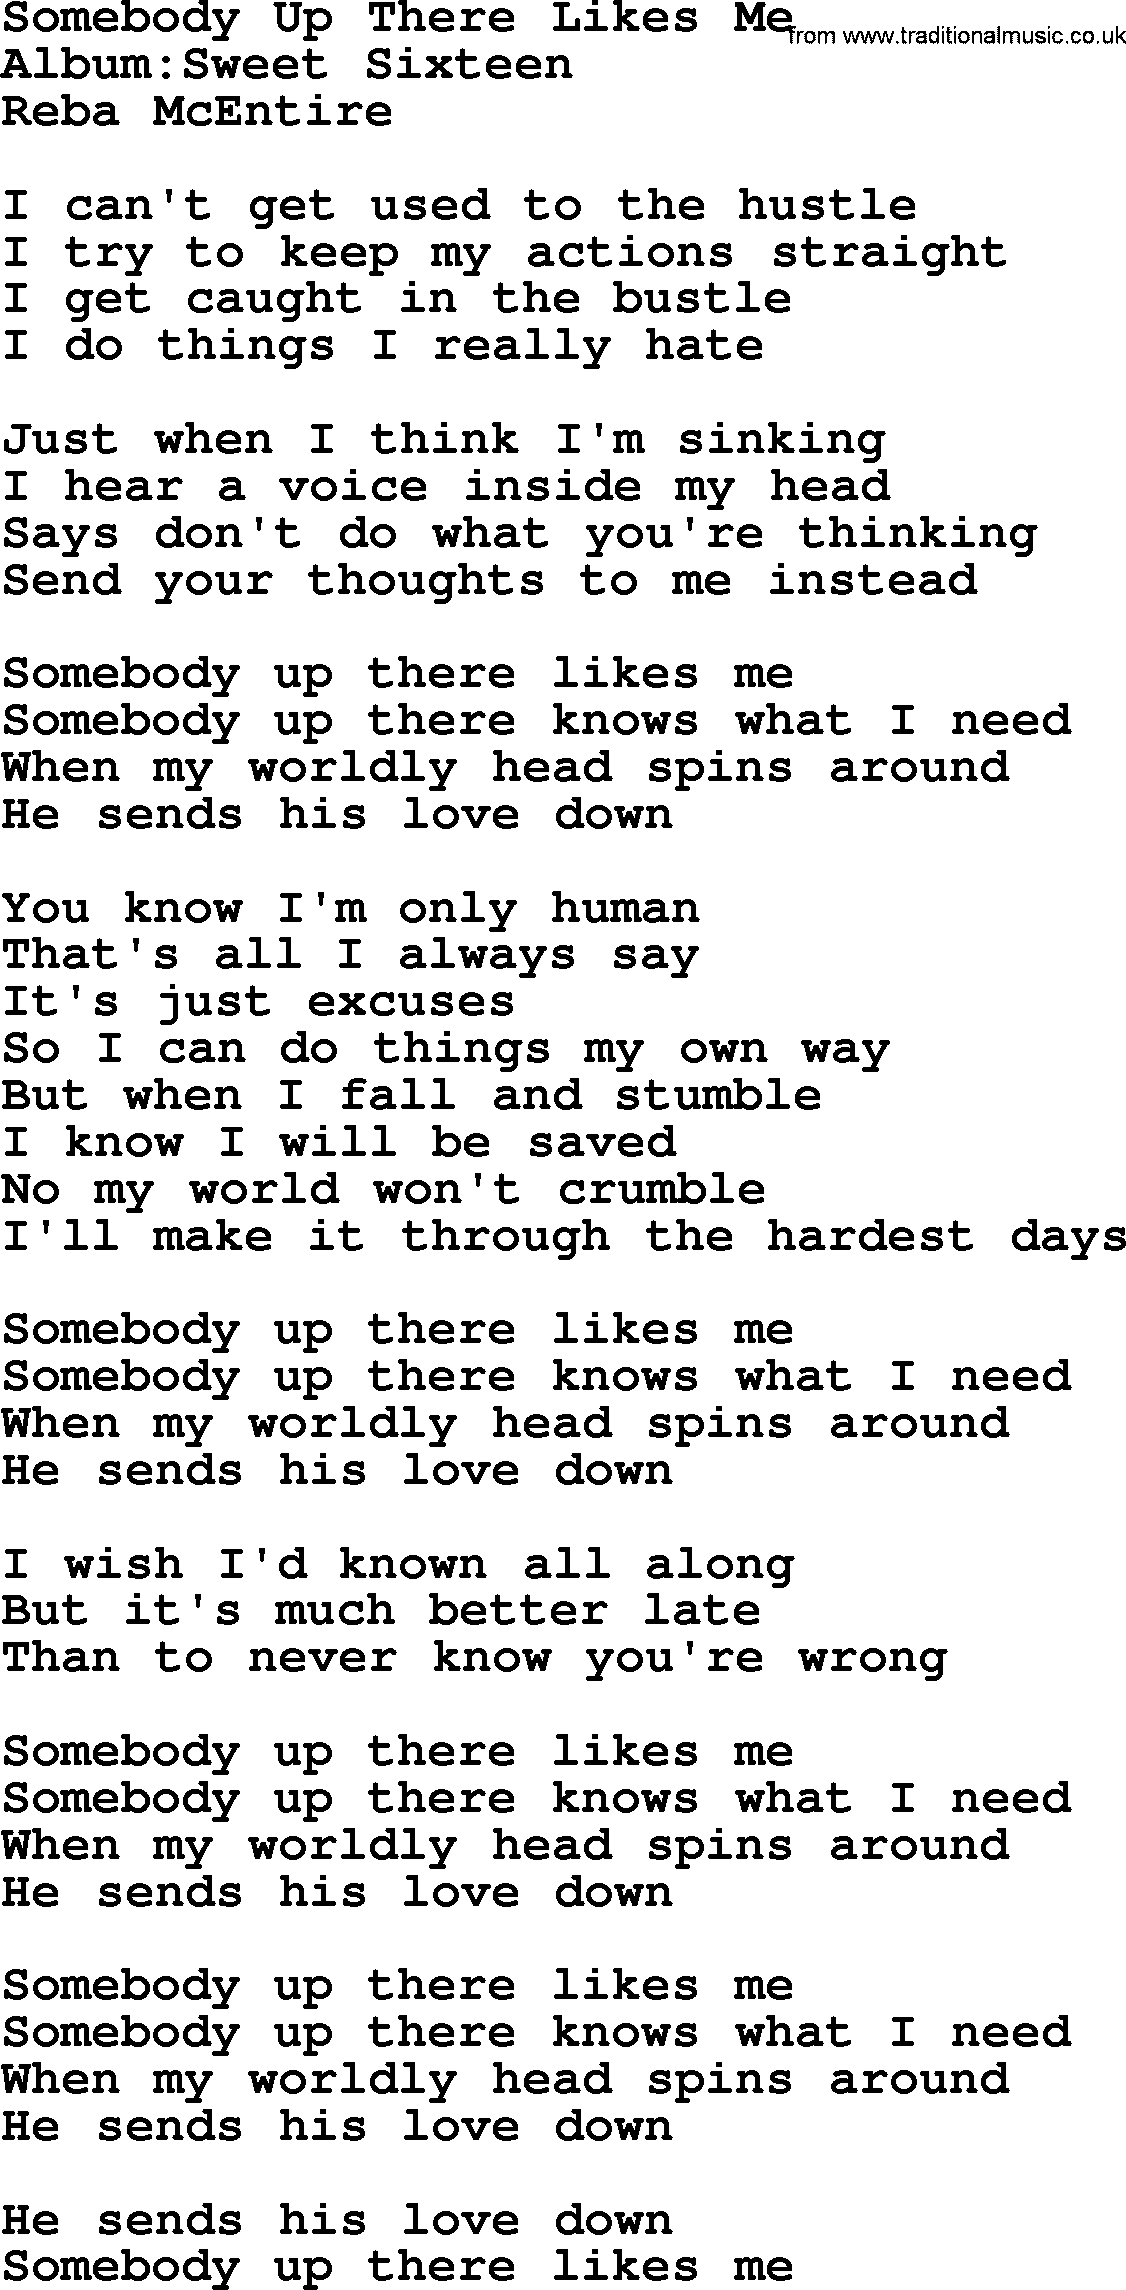 Reba McEntire song: Somebody Up There Likes Me lyrics